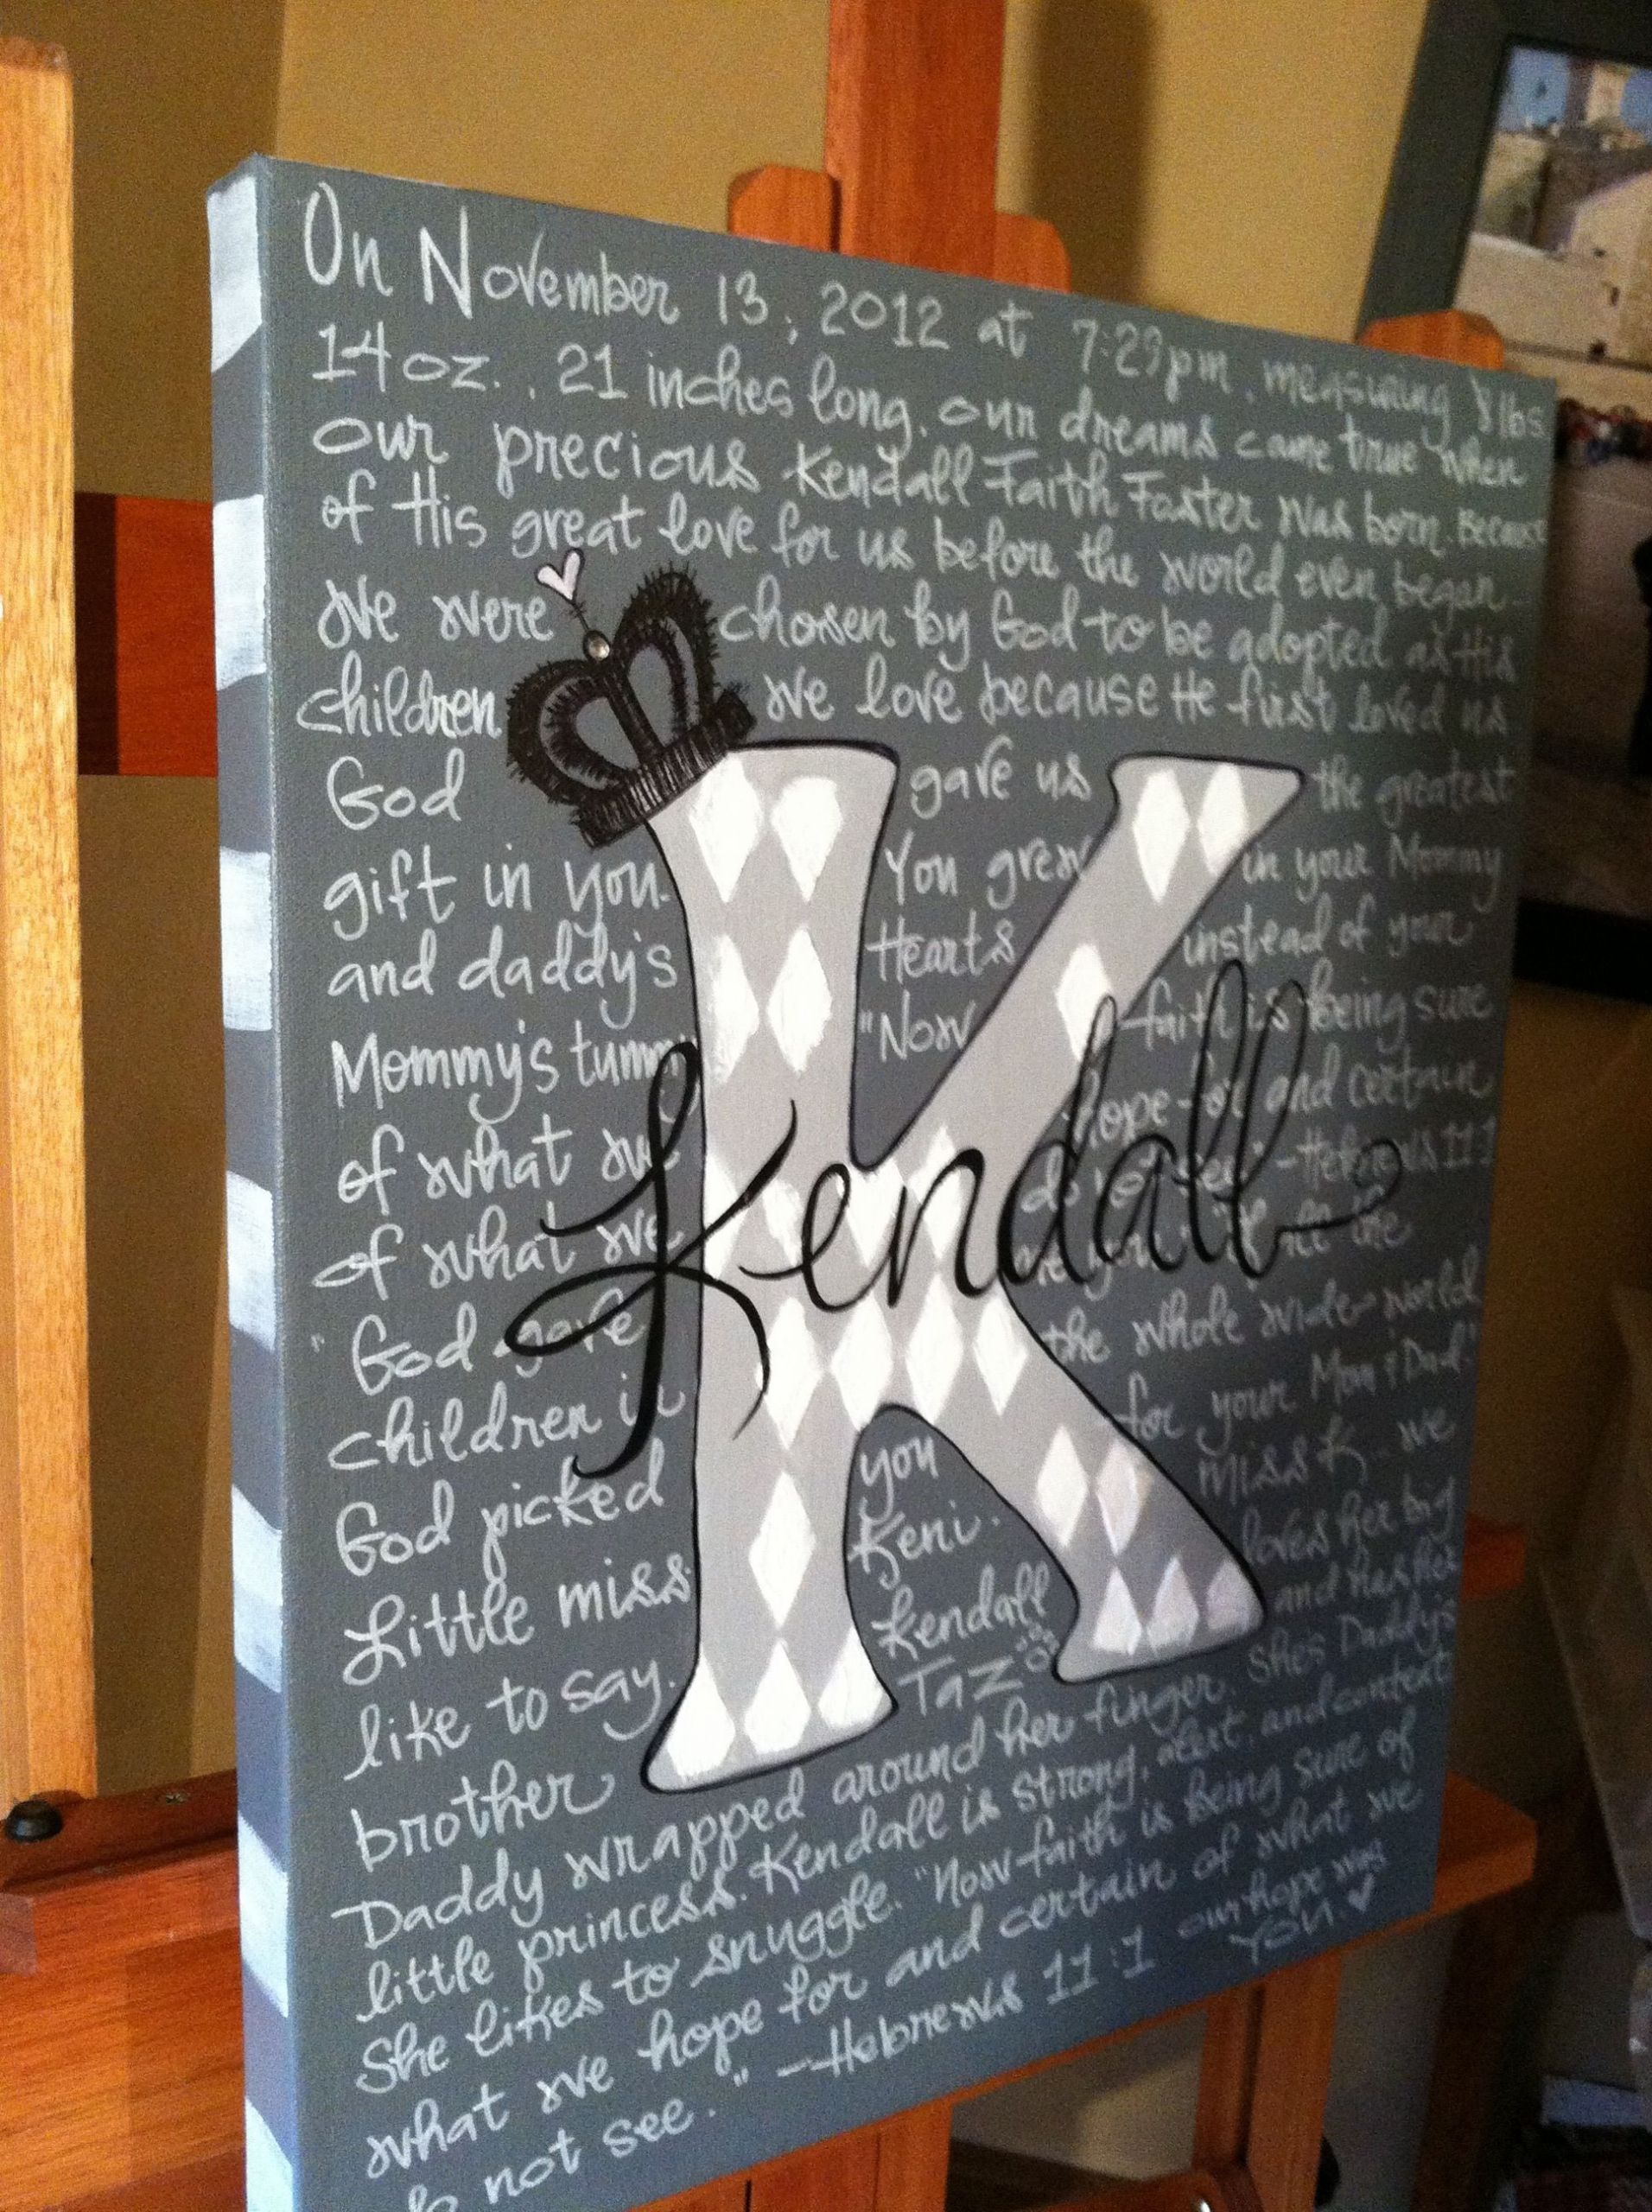 After Graduation Party Ideas
 Buy canvas and paint it with high school colors and write